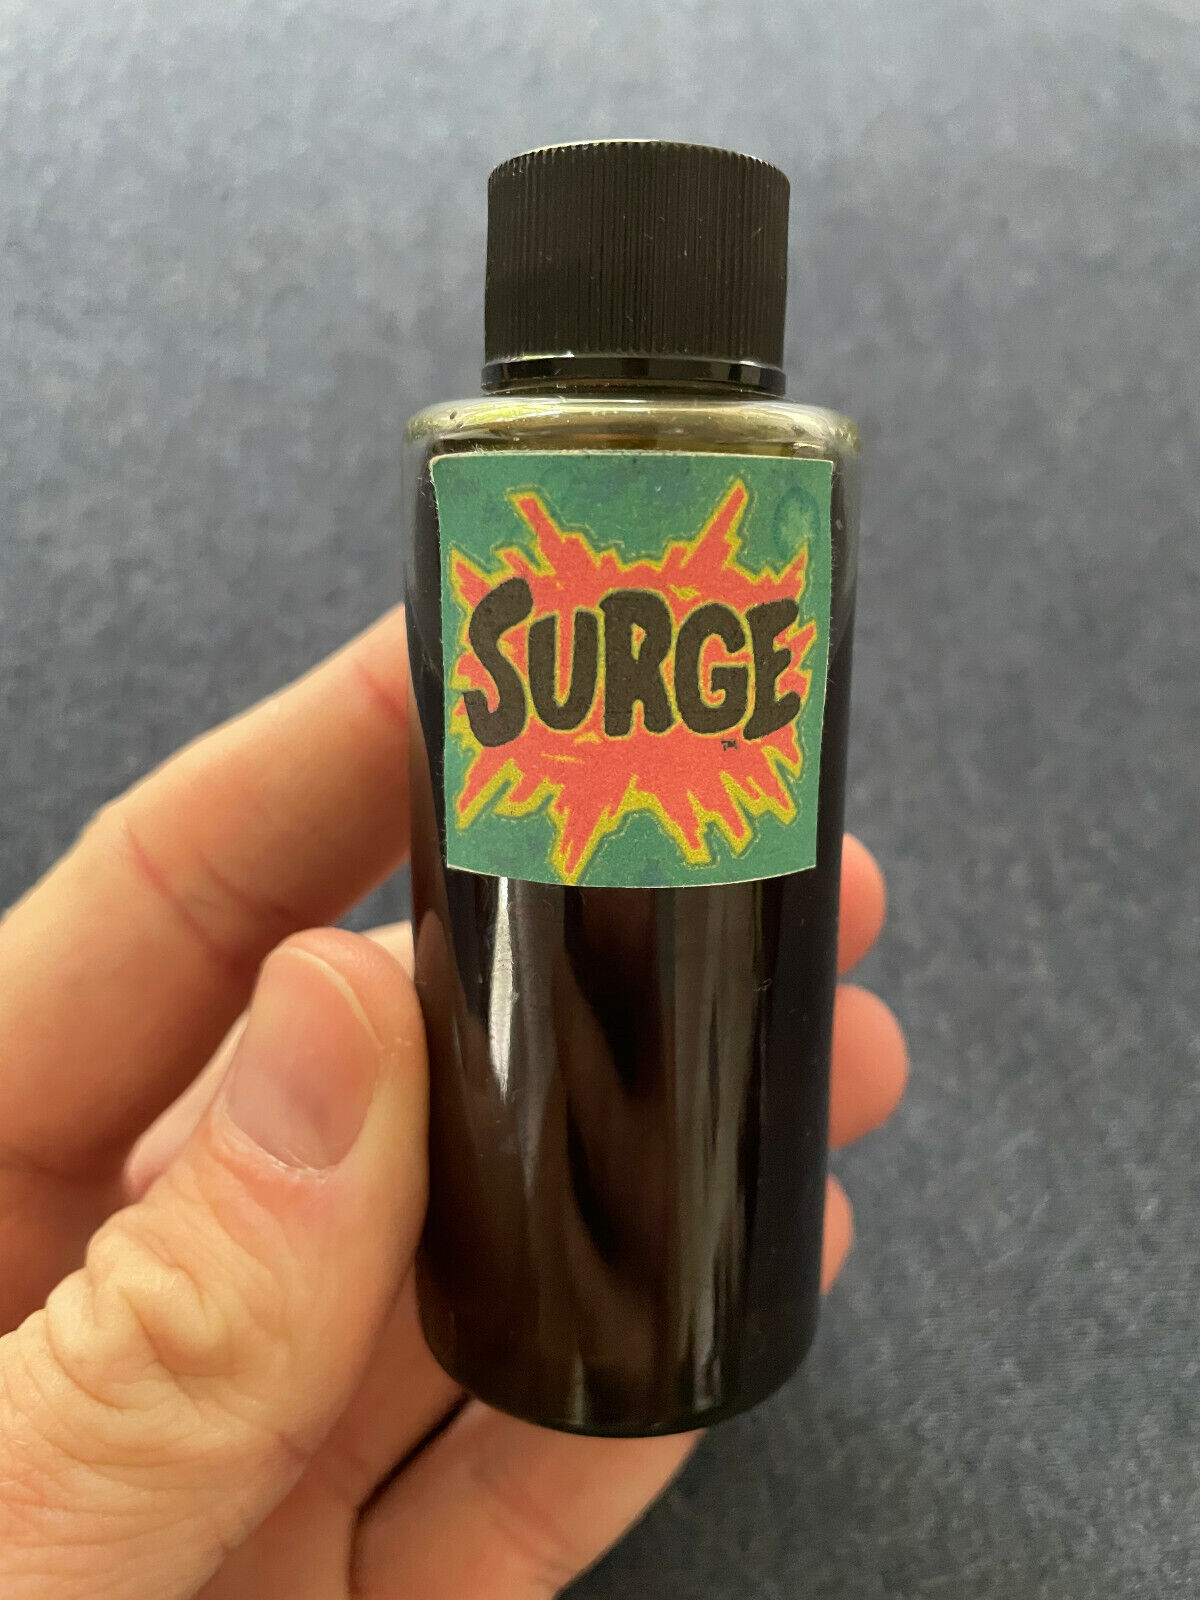 Original Surge Soda Syrup from Y2K: 2 Oz of Syrup - Enough for a 12 Oz Cup